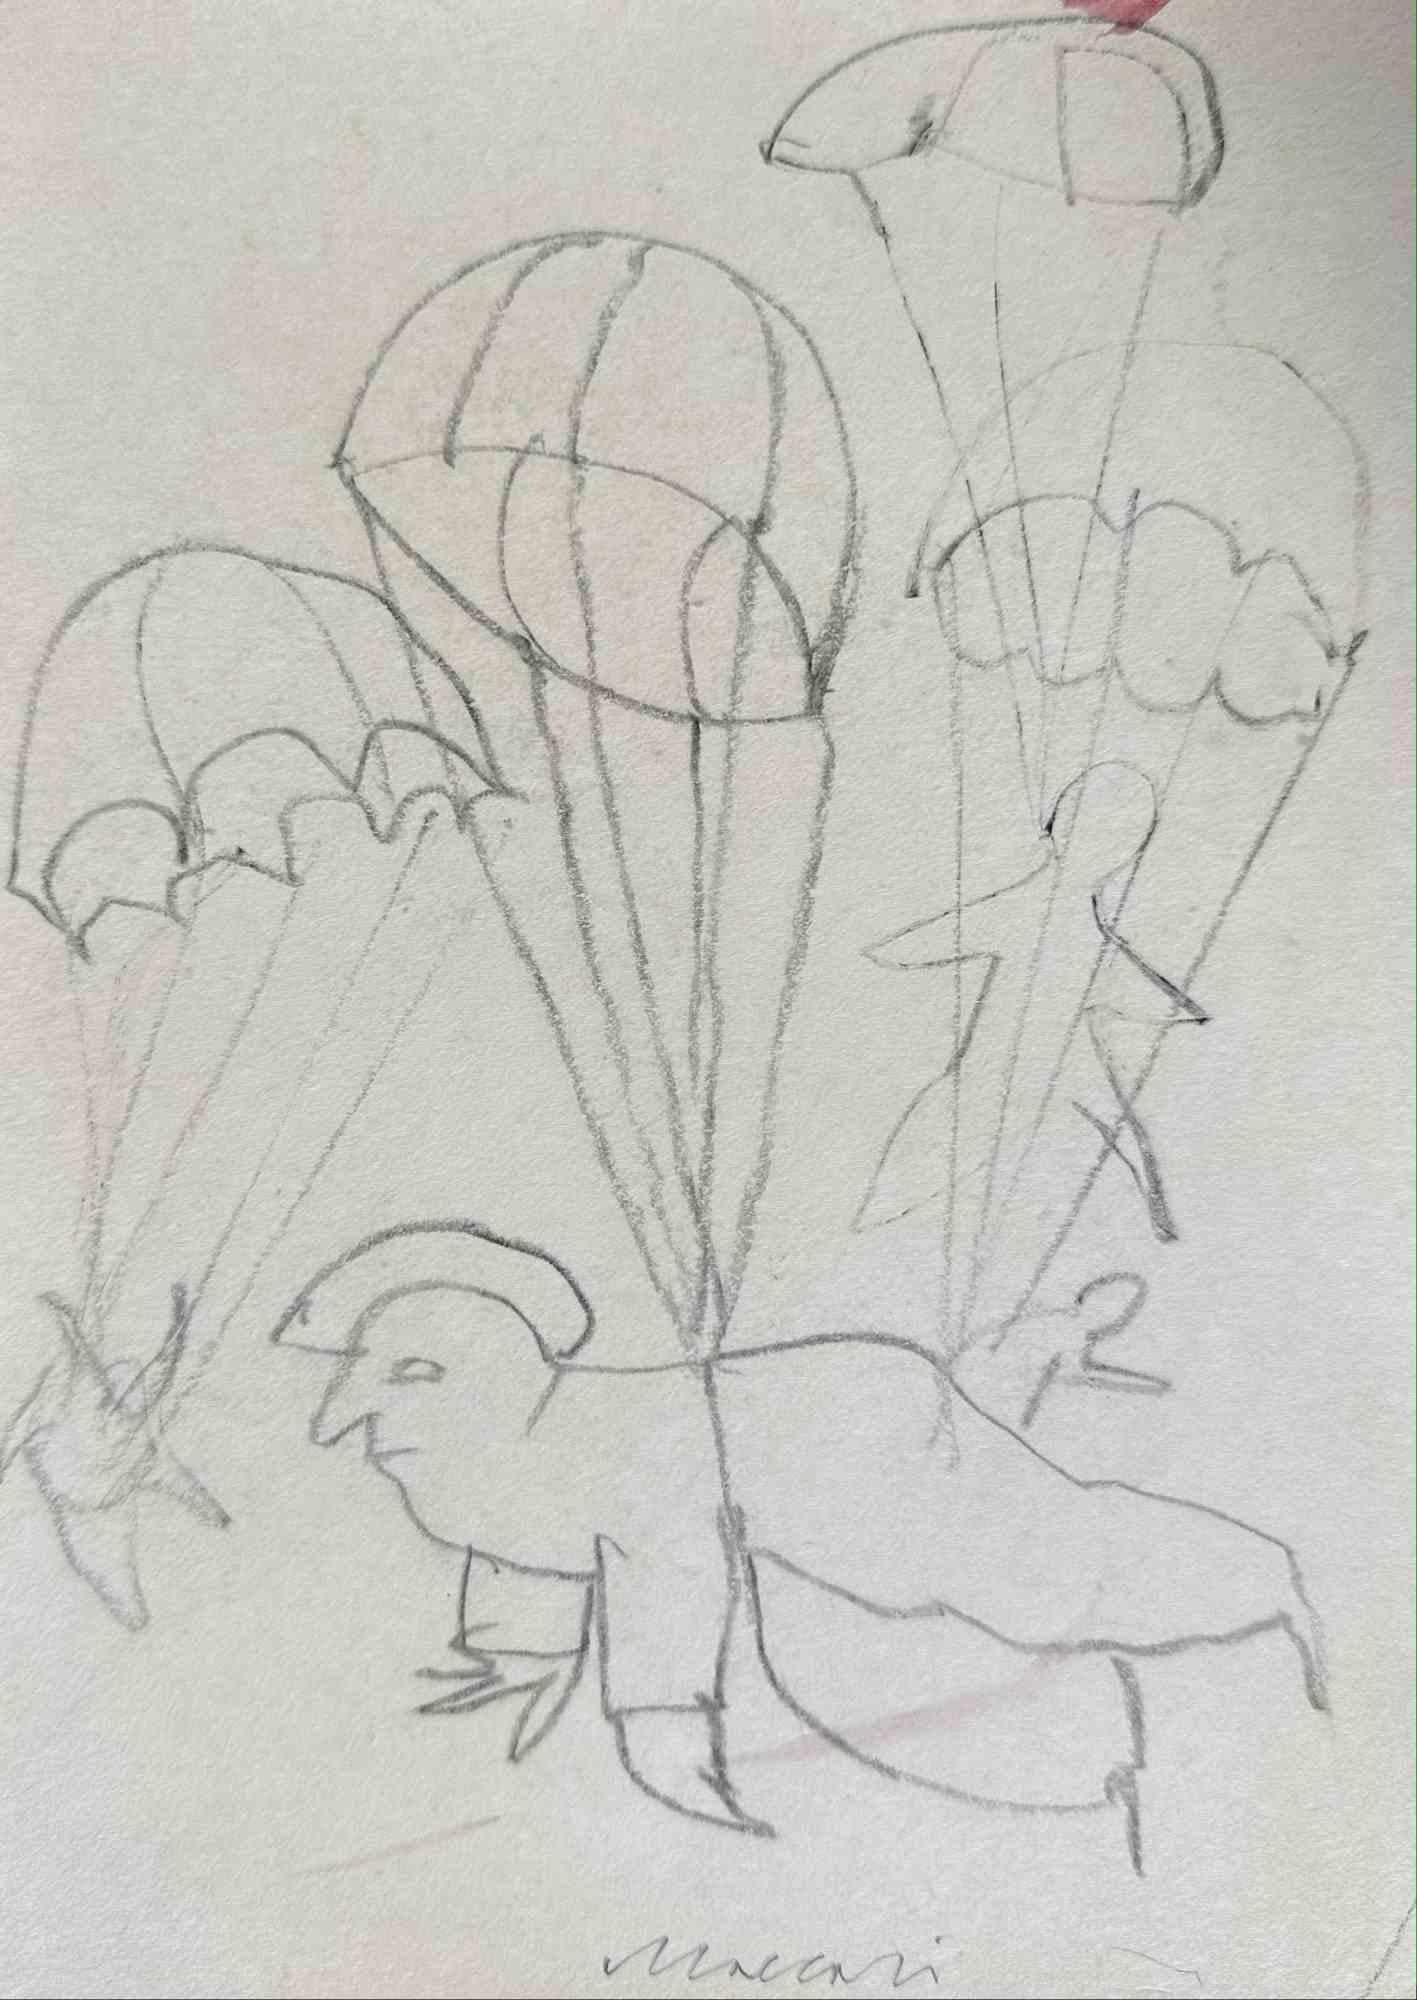 Parachutist is a pencil Drawing realized by Mino Maccari  (1924-1989) in the 1960s.

Hand-signed on the lower.

Good conditions.

Mino Maccari (Siena, 1924-Rome, June 16, 1989) was an Italian writer, painter, engraver and journalist, winner of the